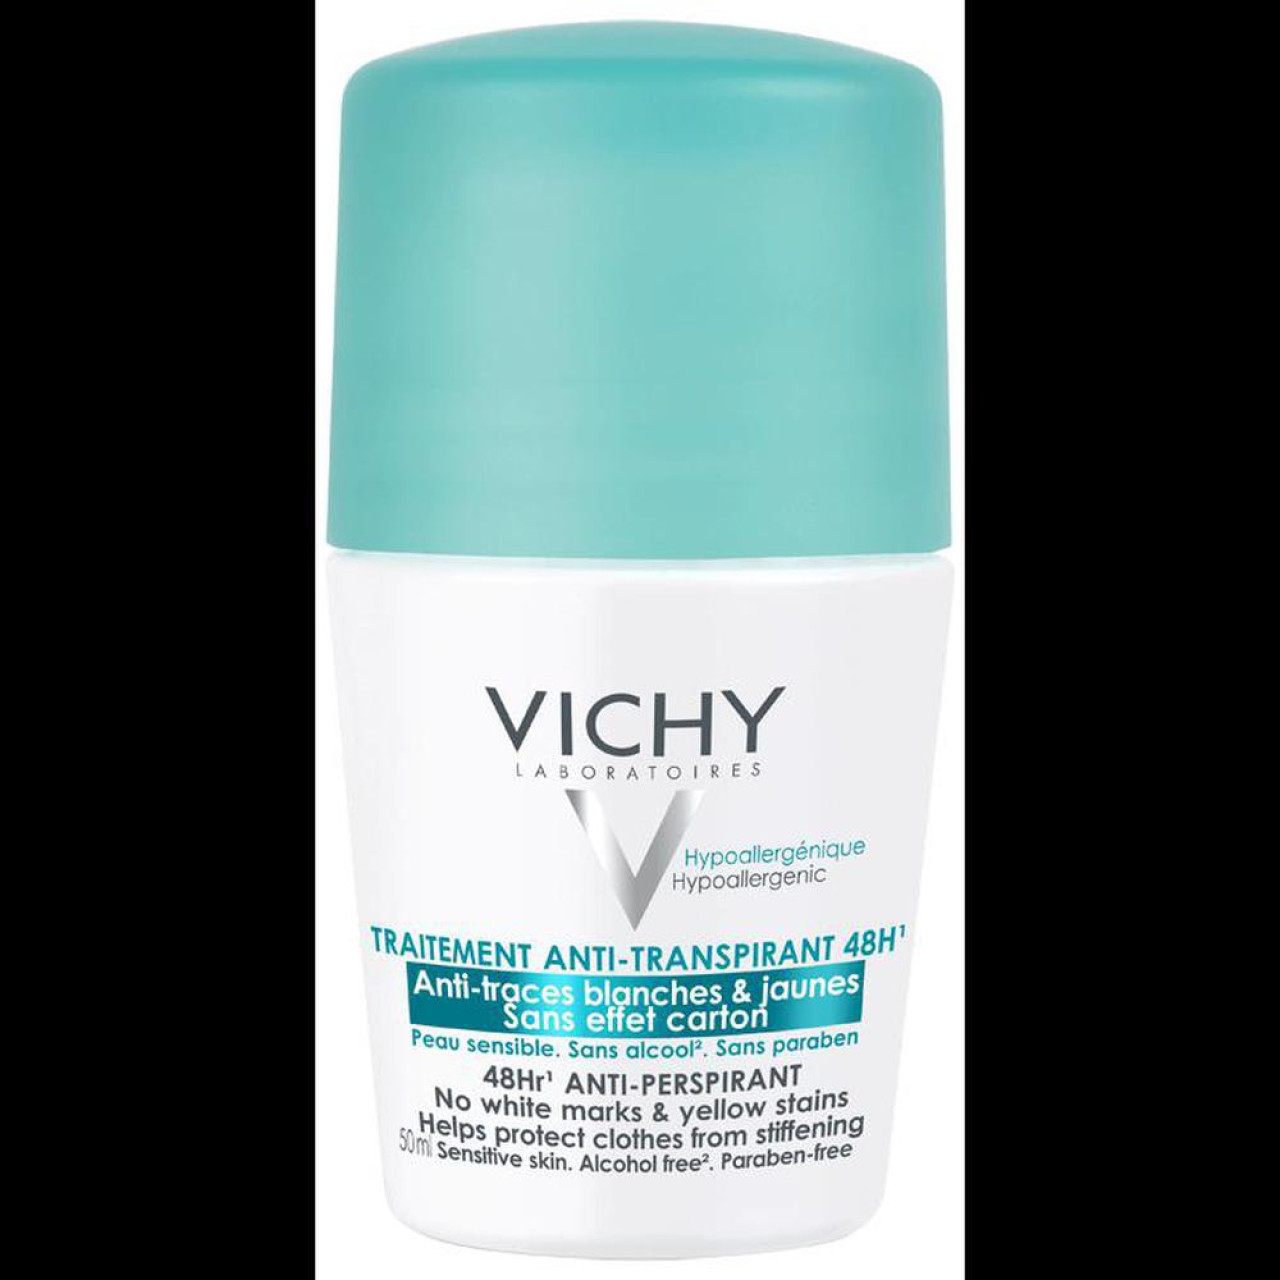 Vichy deo bille anti-perspirant.a/stains